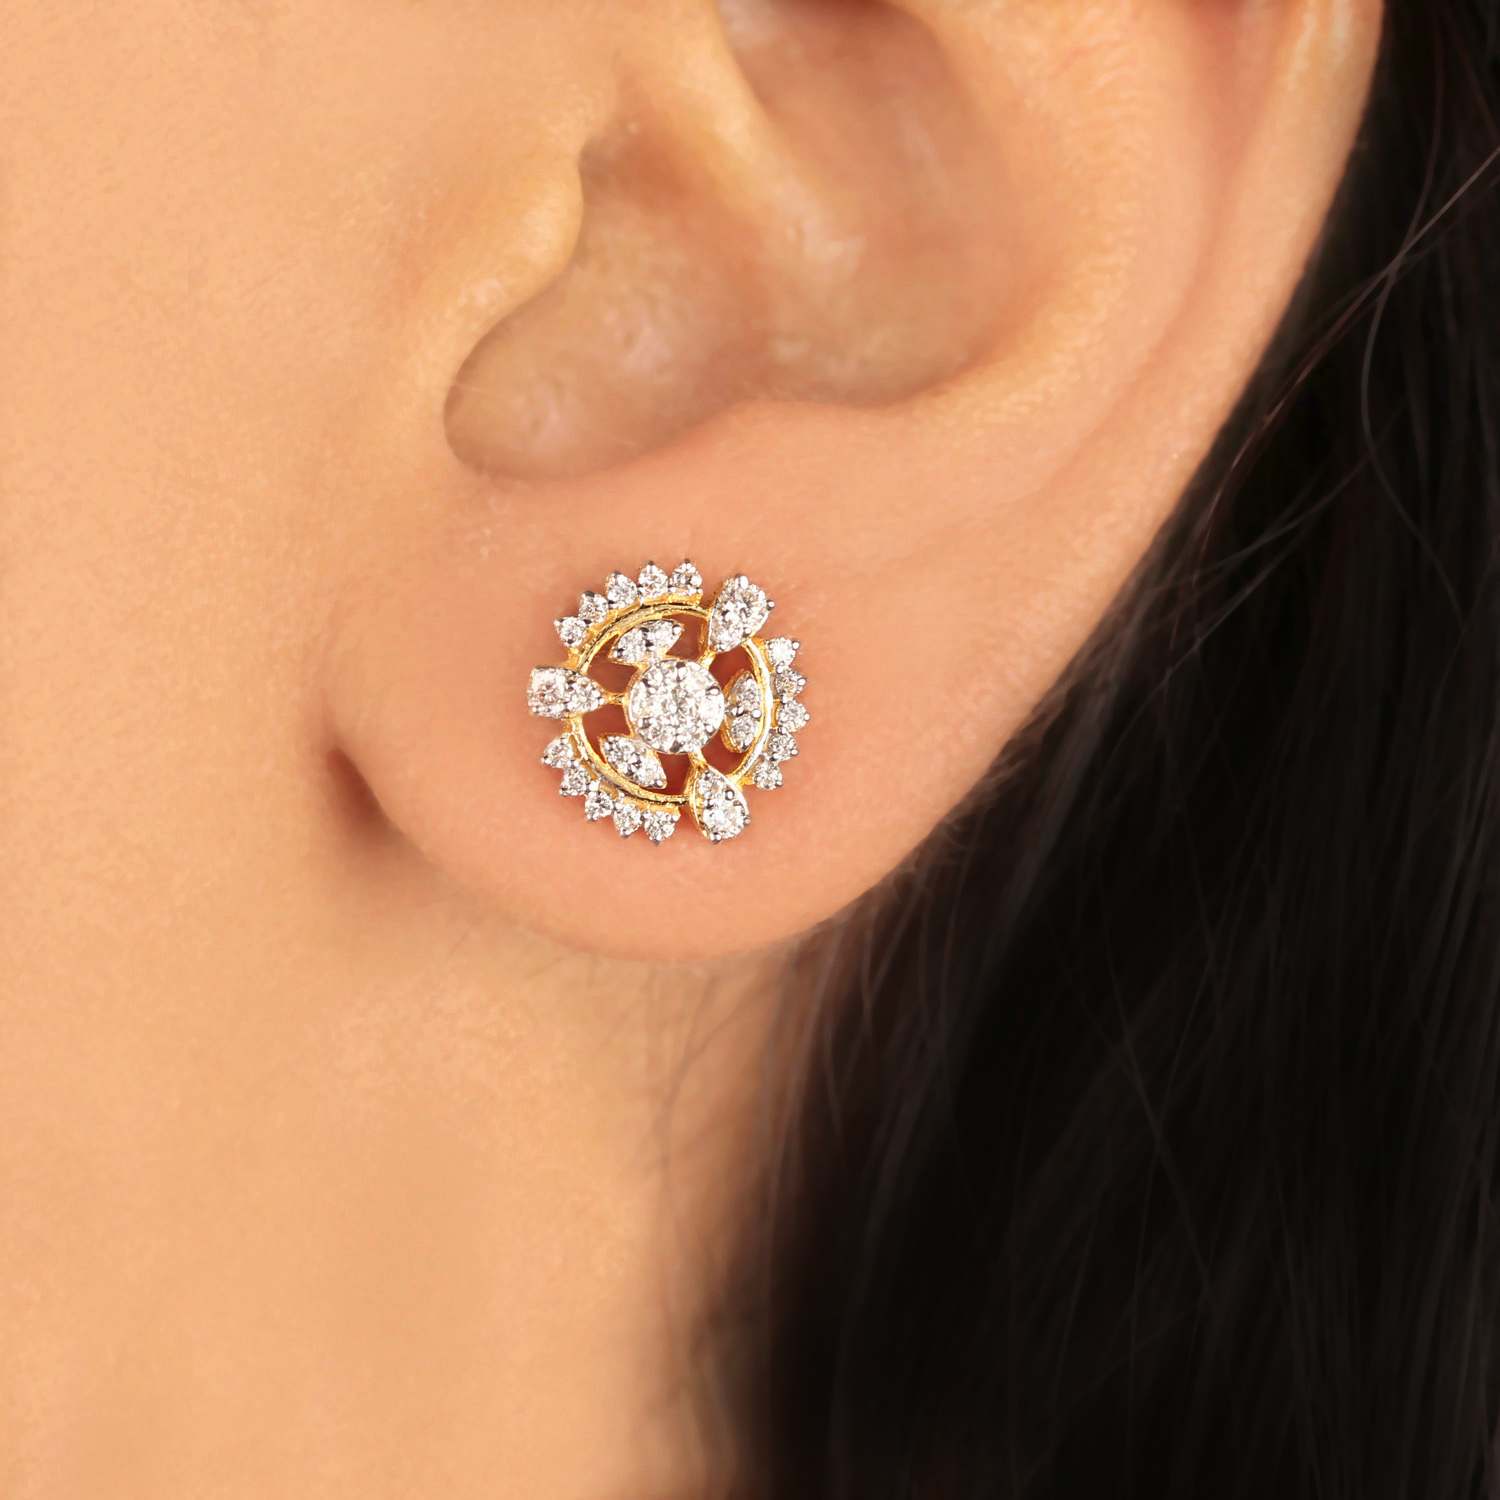 Latest Desiged Earring